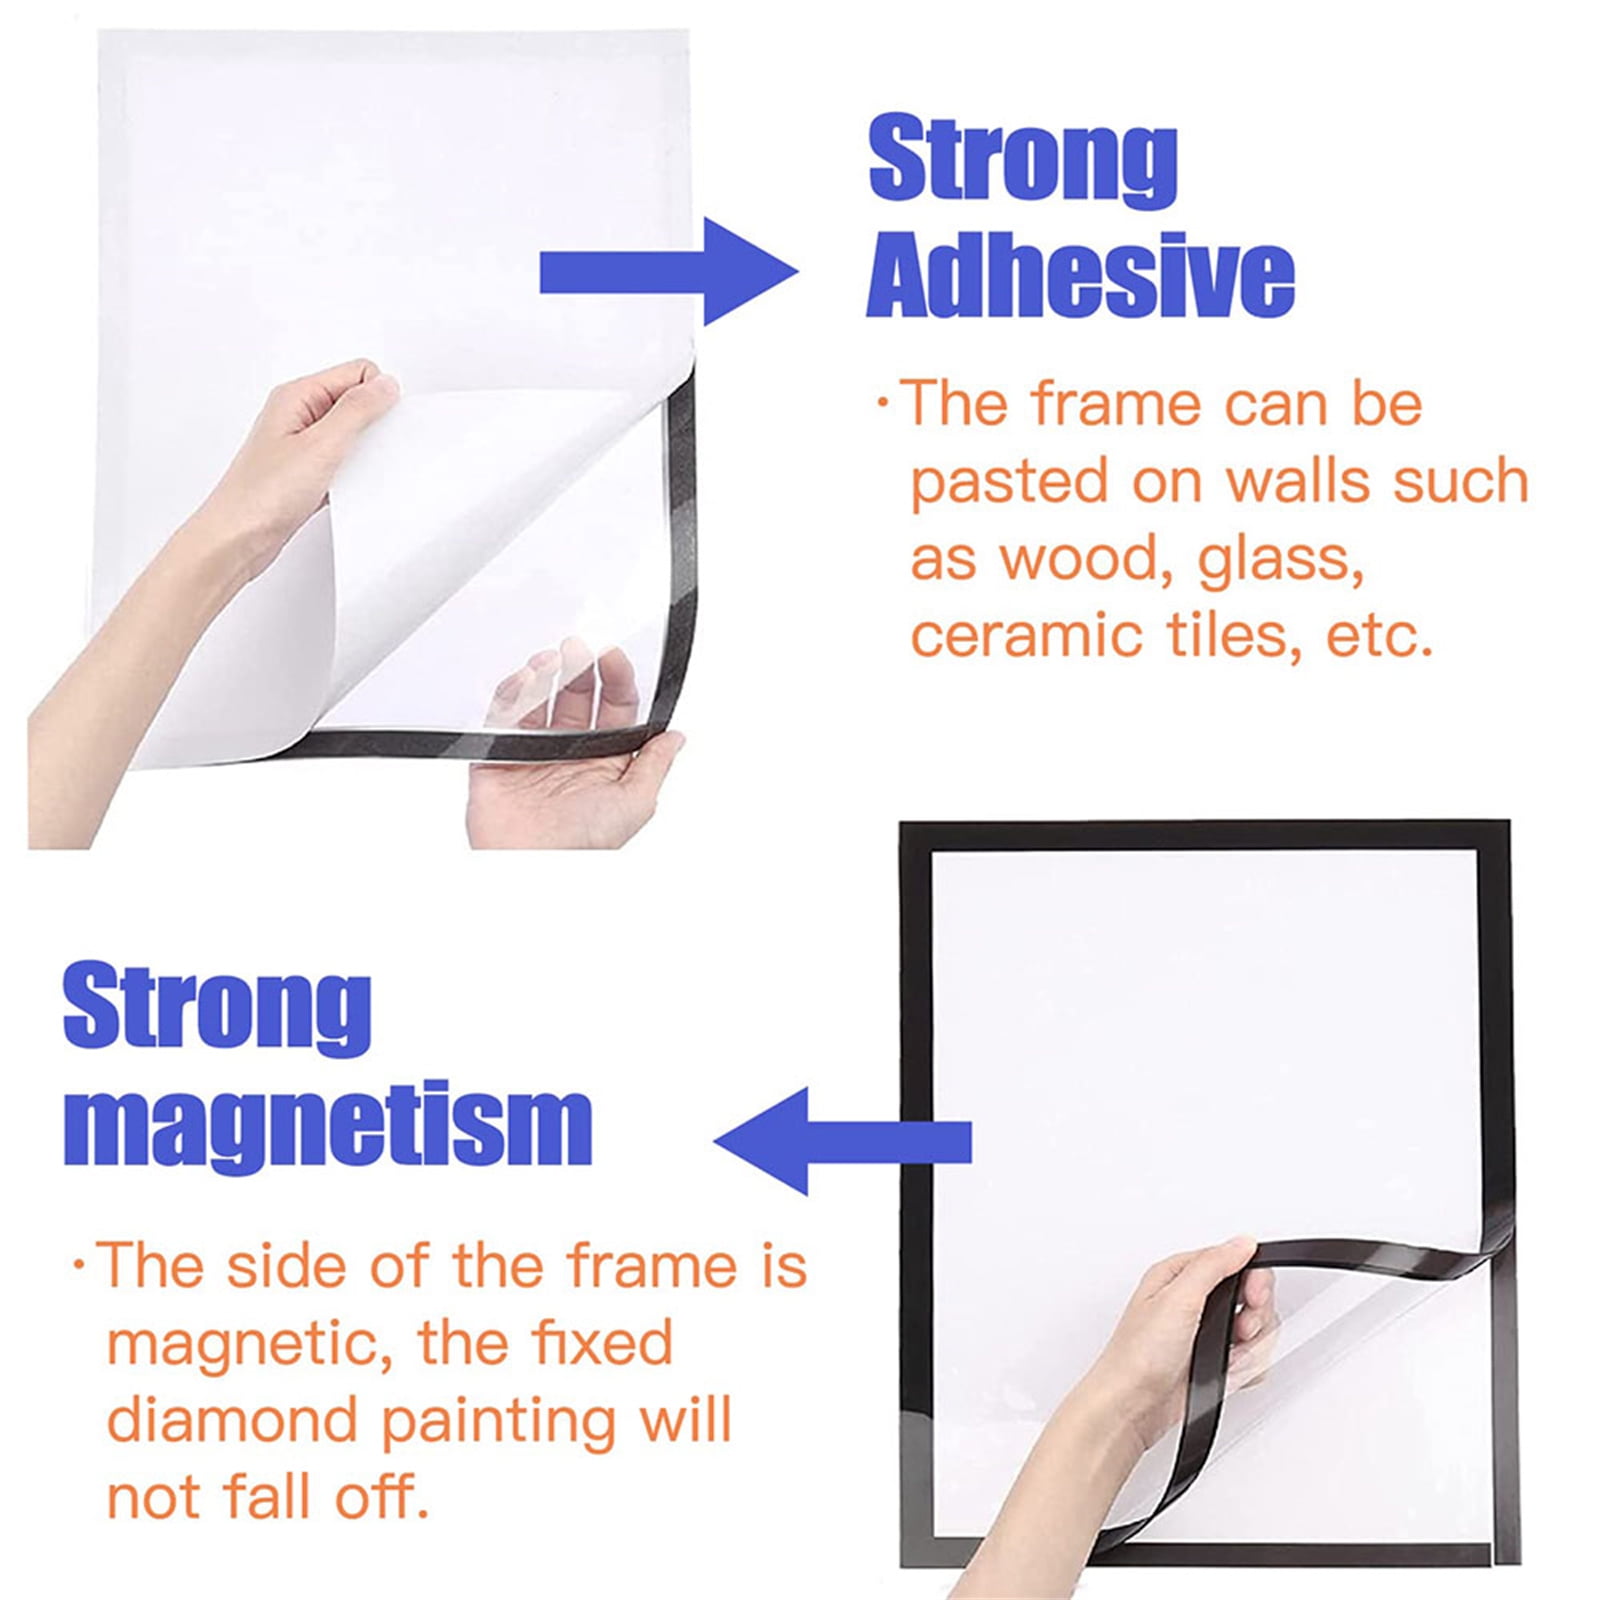  SEWACC 4pcs Diamond Frame Picture Frames 30x40cm Picture  Frames 12x16 30cm x 40cm Frame for Diamond Art Frames With Frame Frame  Photo Frame Magnetic Accessories Child Pvc